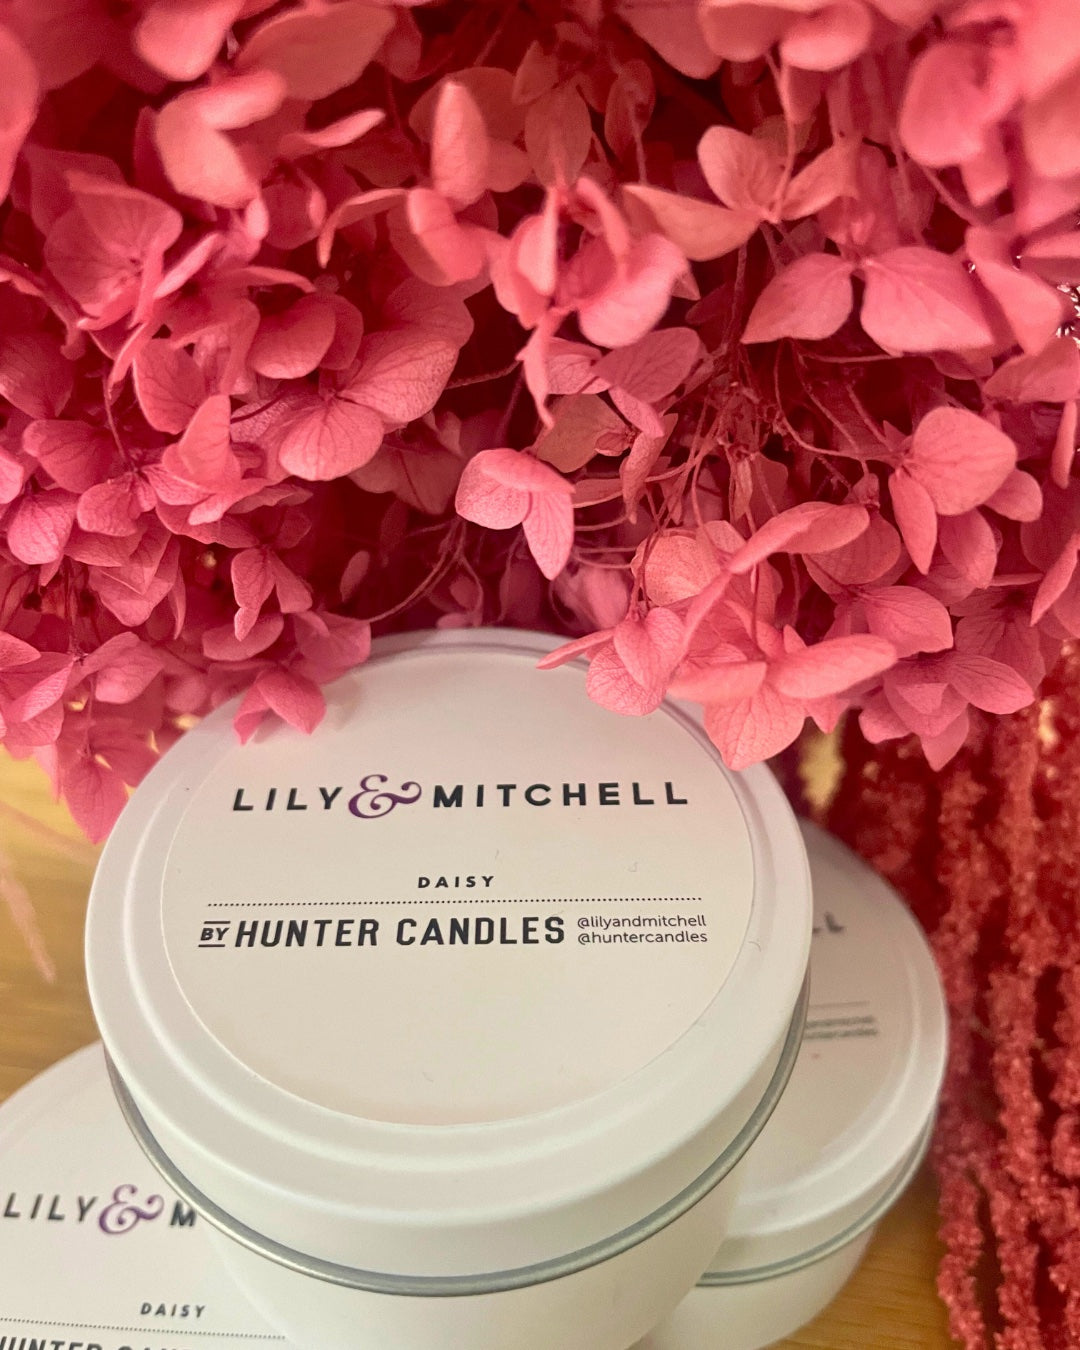 Free travel candle when you spend $100